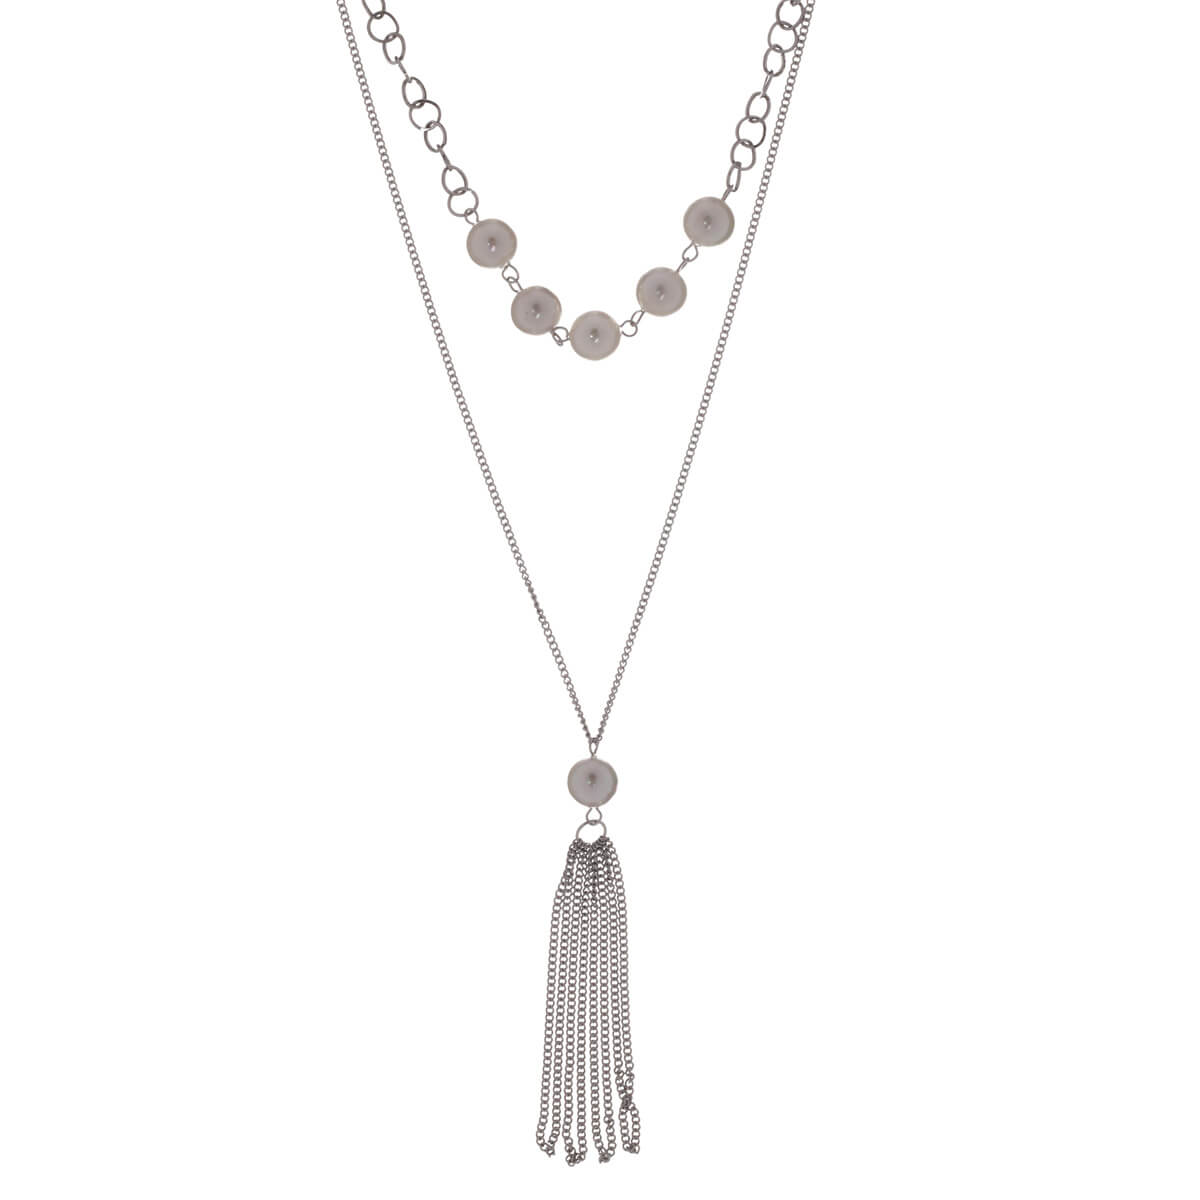 Pearl necklace 2 chains (steel316L)